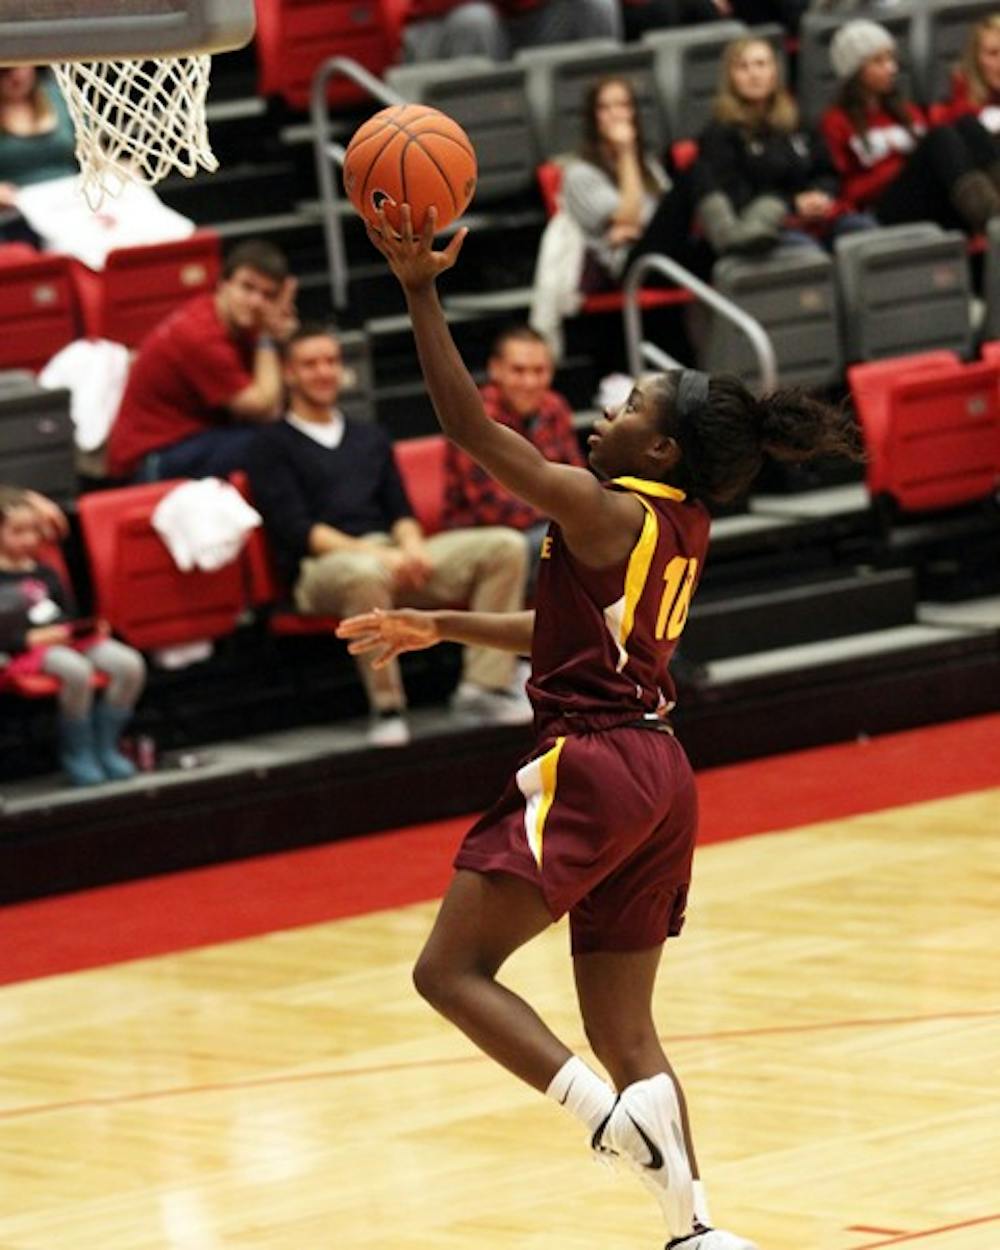 Promise Amukamara performs a layup in a game against Washington State on Jan. 26. Amukamara will be cheering for her brother Prince, cornerback for the New York Giants, in Super Bowl XLVI. (Photo courtesy of Steve Rodriguez)